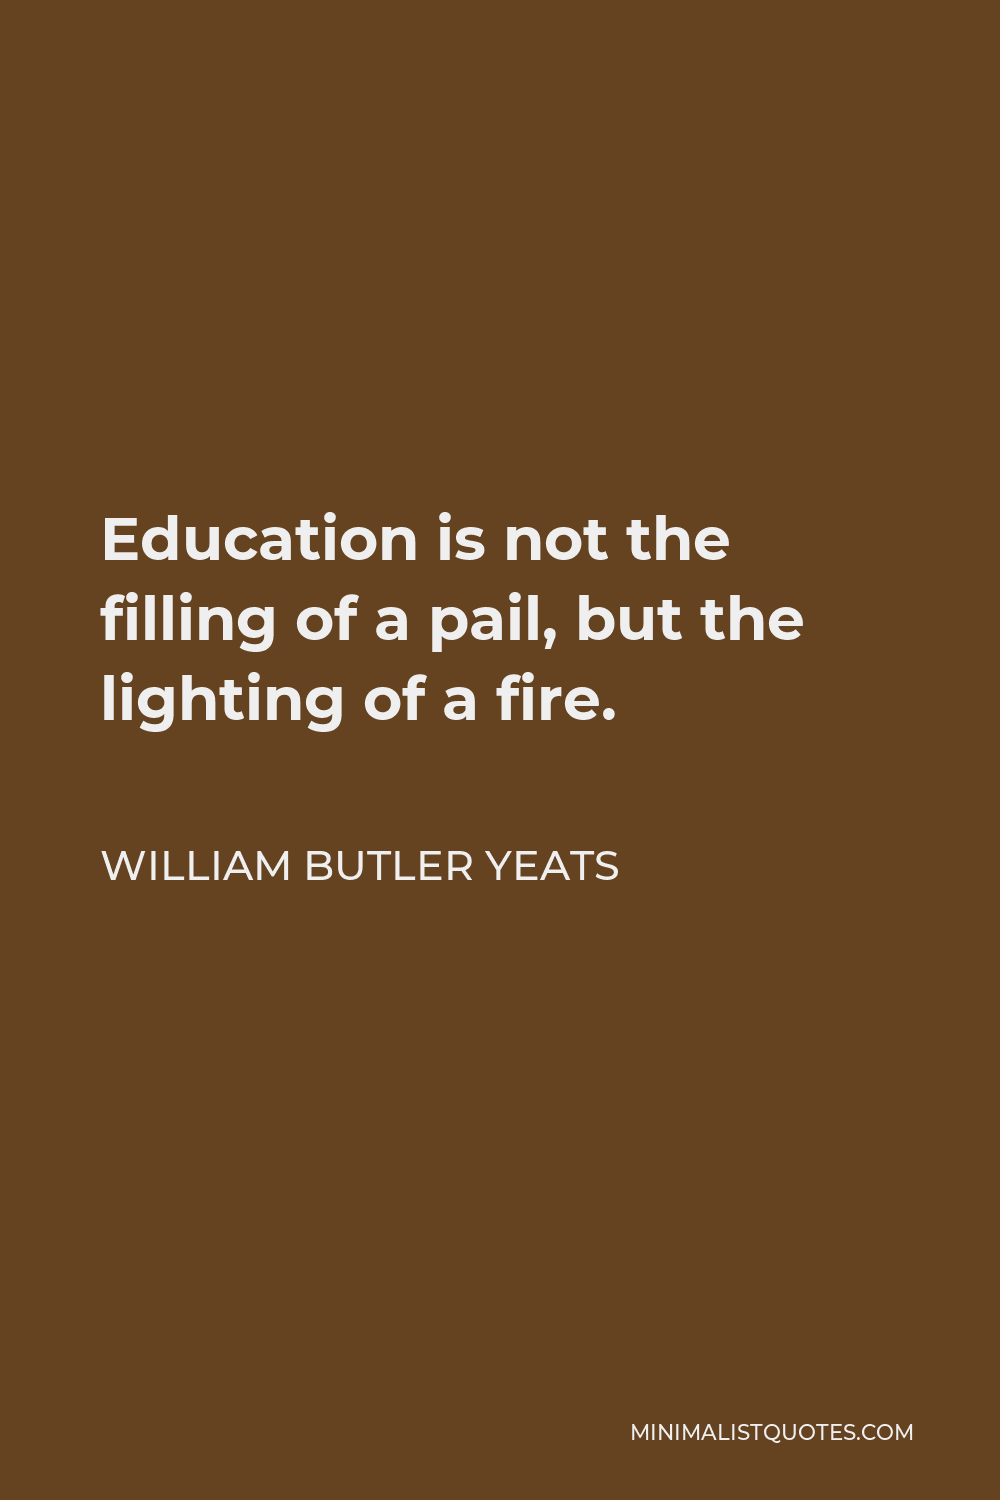 William Butler Yeats Quote: Education is not the filling of a pail, but ...